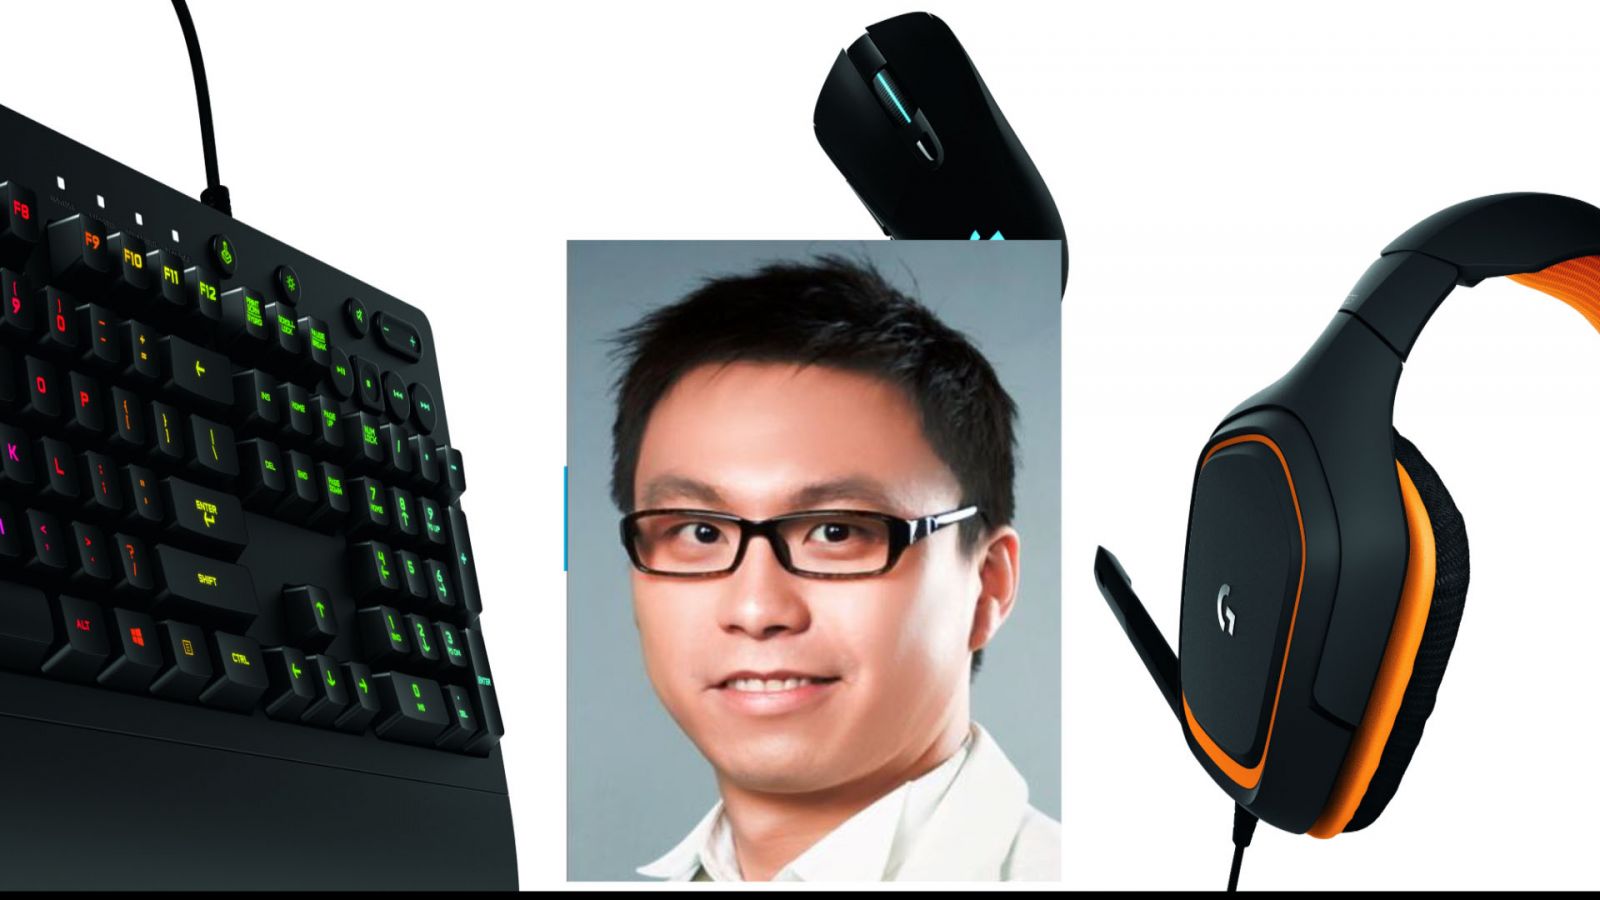 Logitech has big plans for eSports and gaming